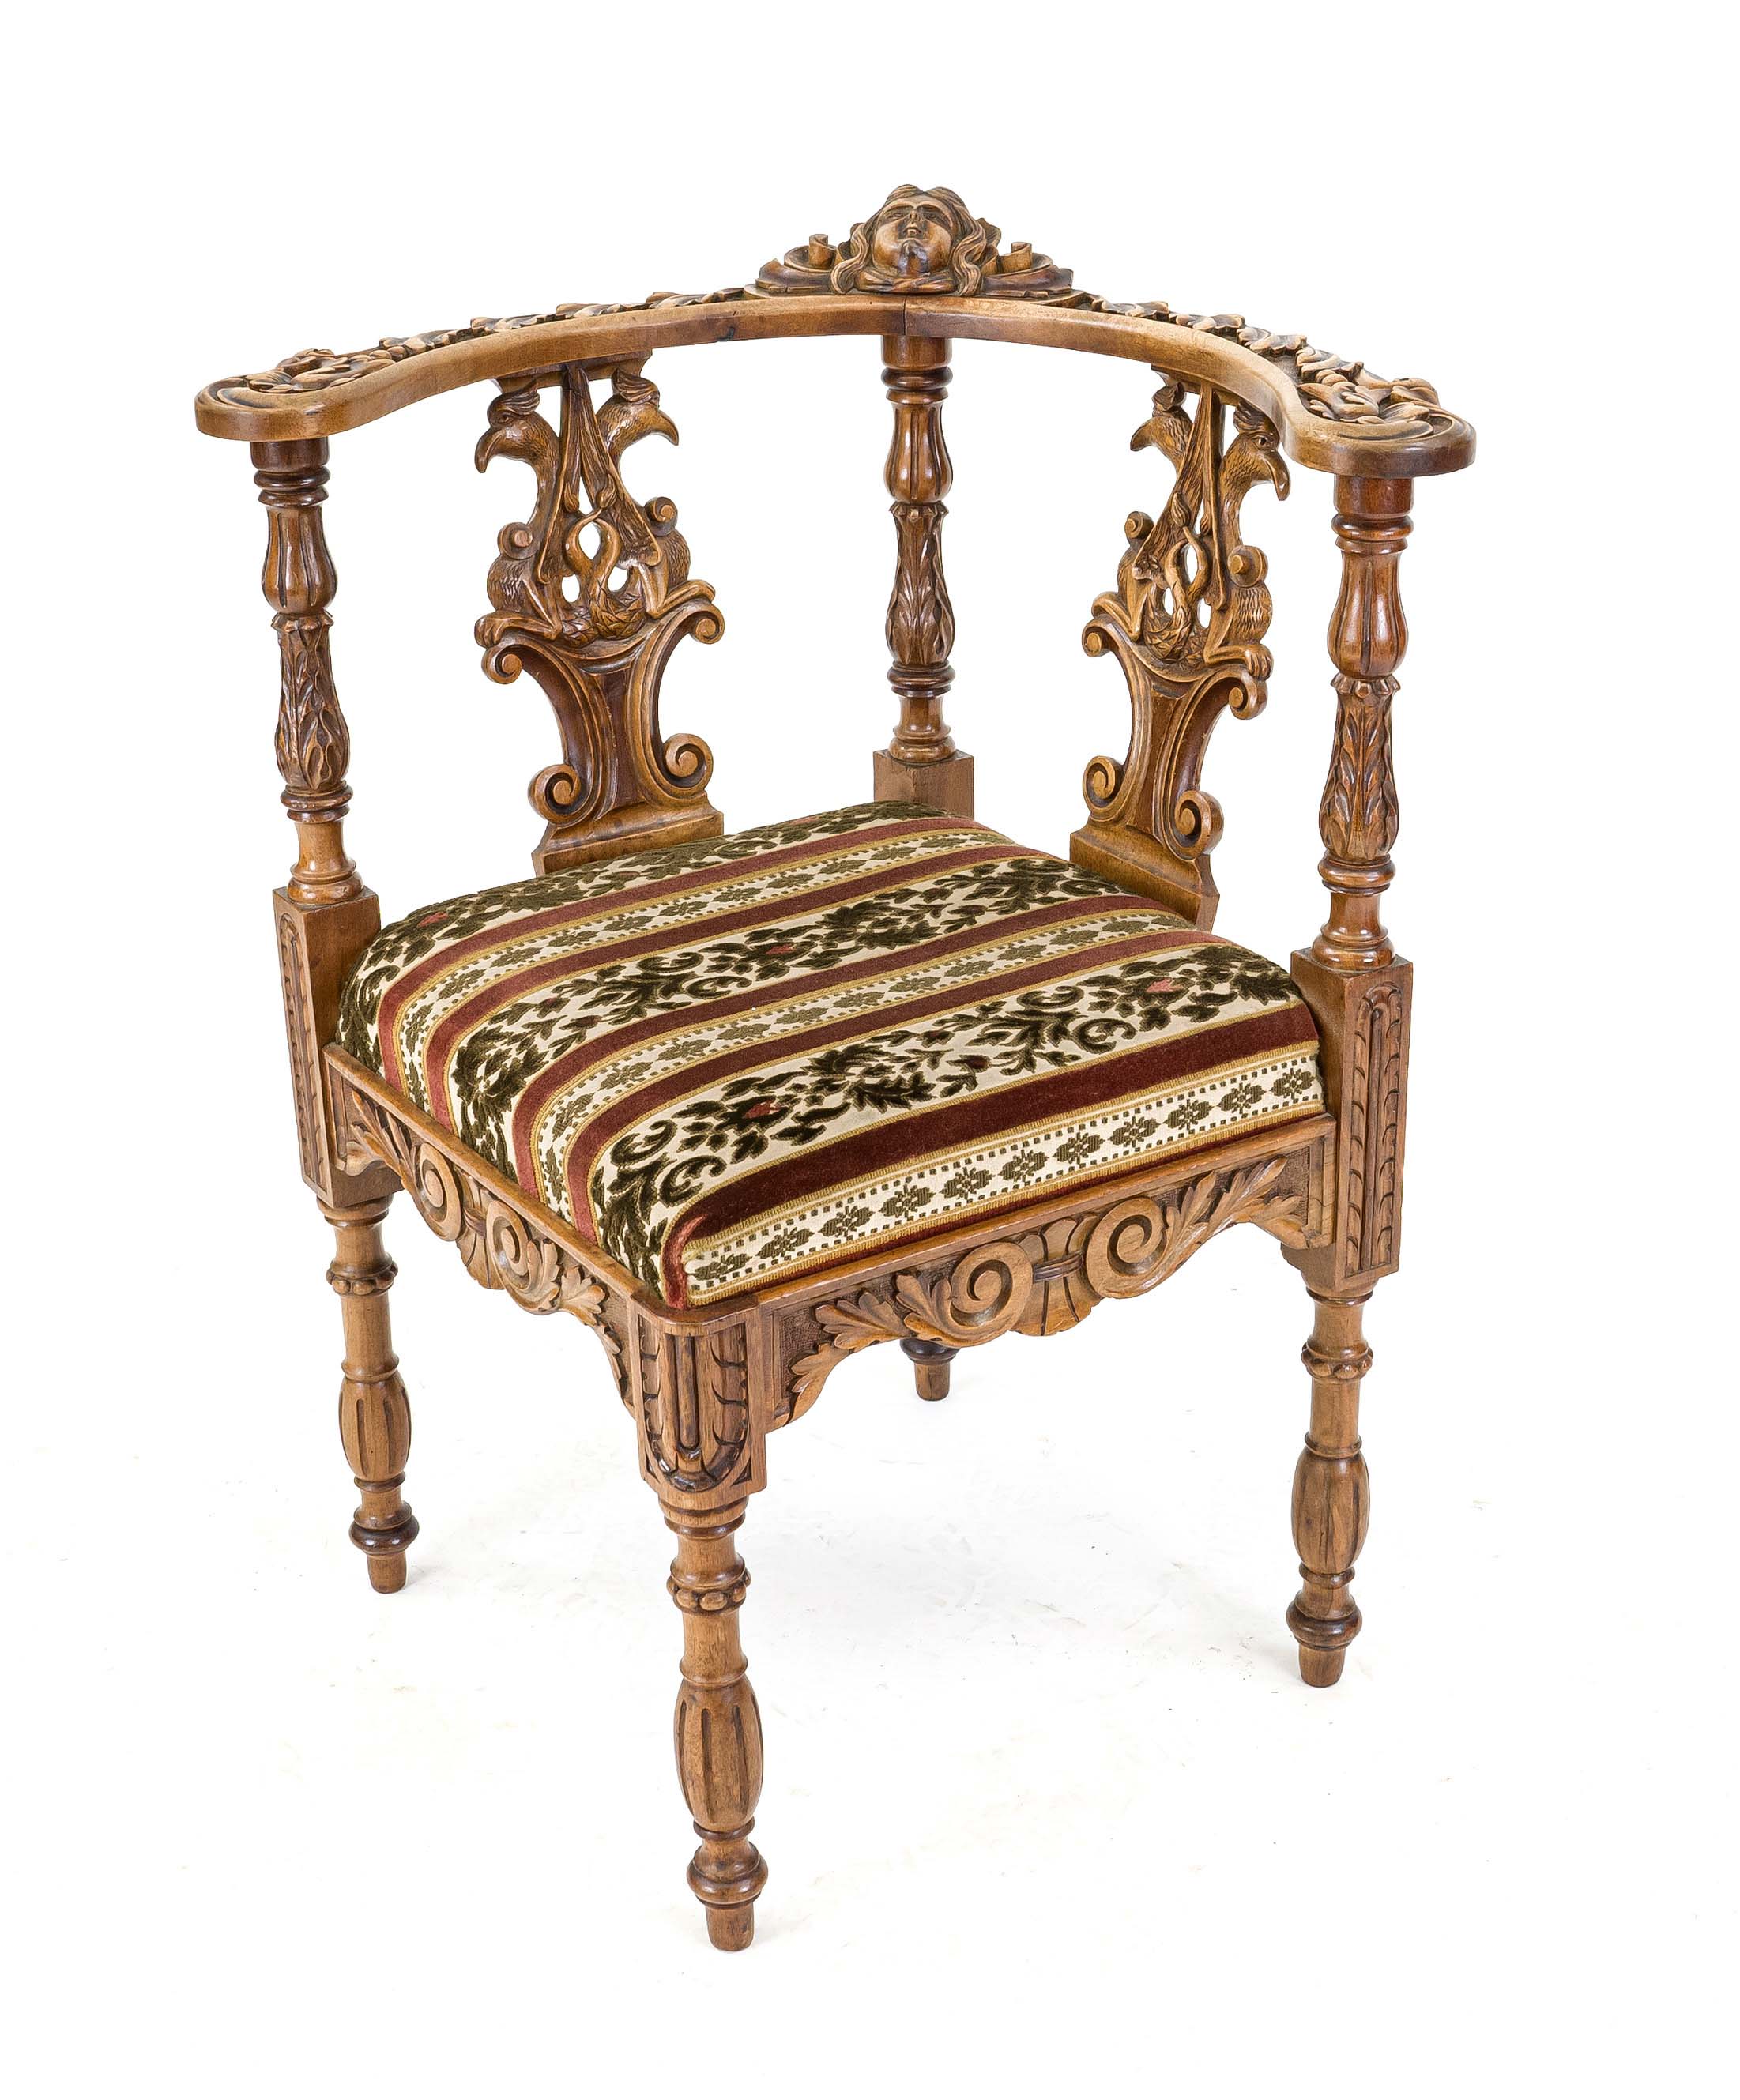 Historicism corner chair from around 1880, walnut, partly sculptural carving typical of the